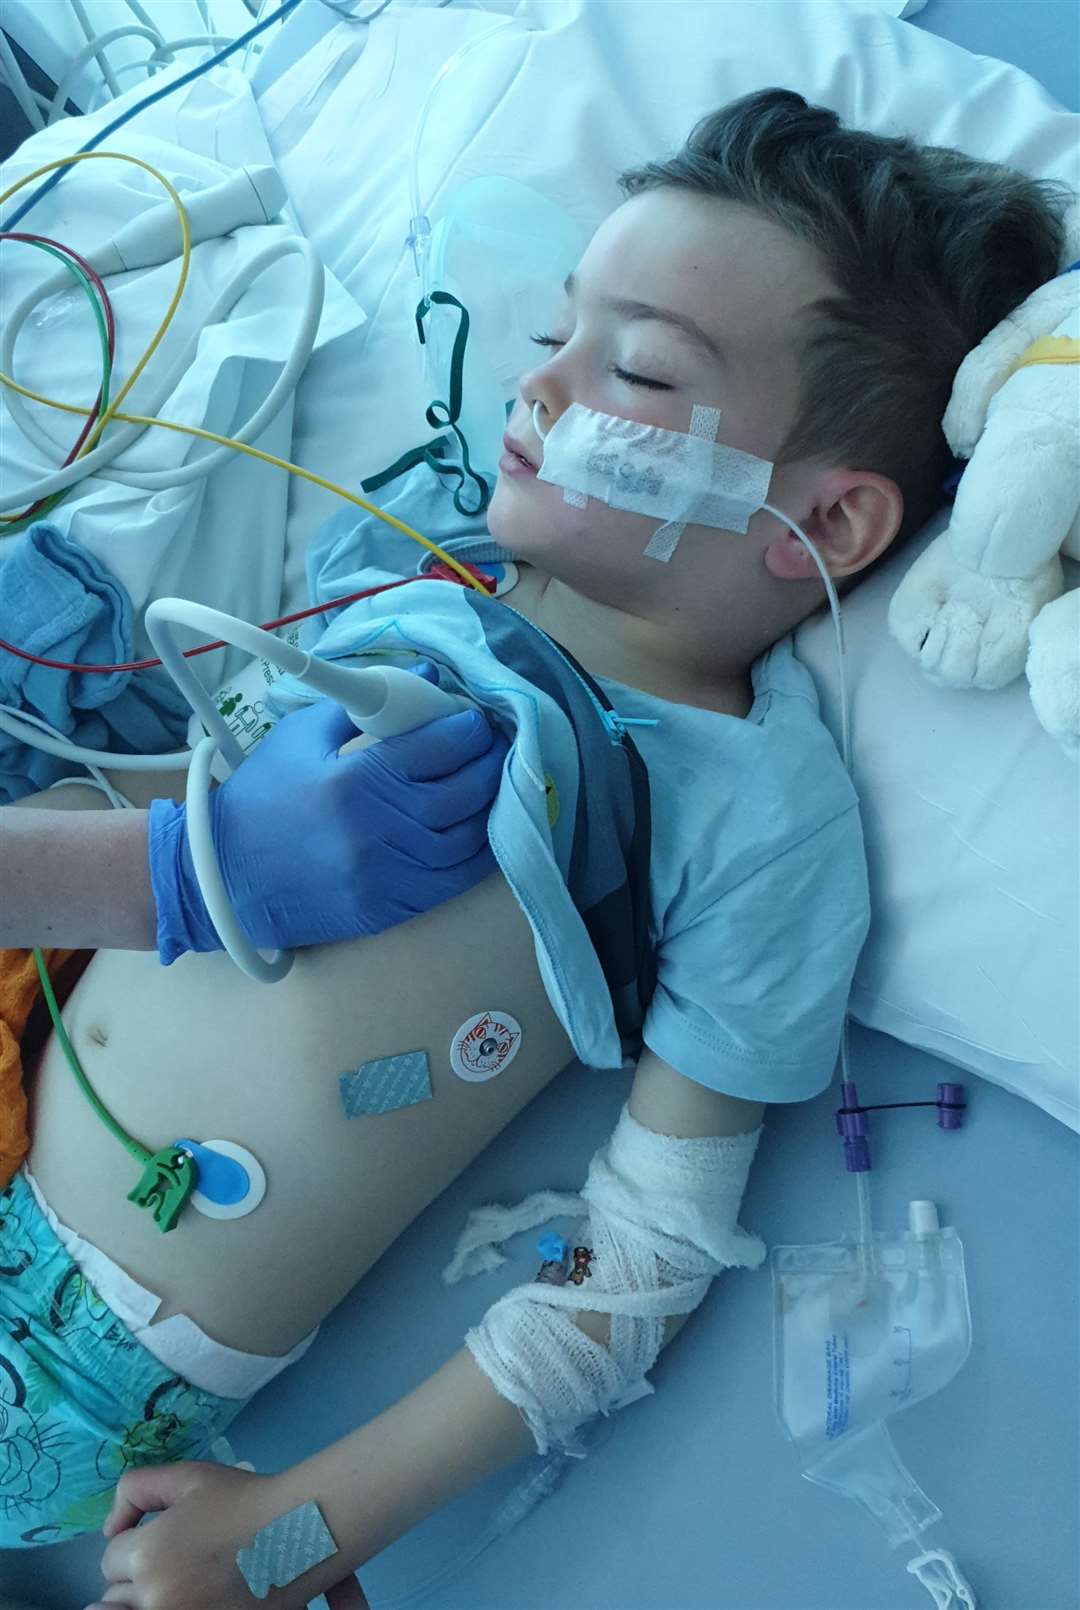 Marley was blue lighted to an ICU at a children's hospital in London after suffering a rare illness caused by Covid-19